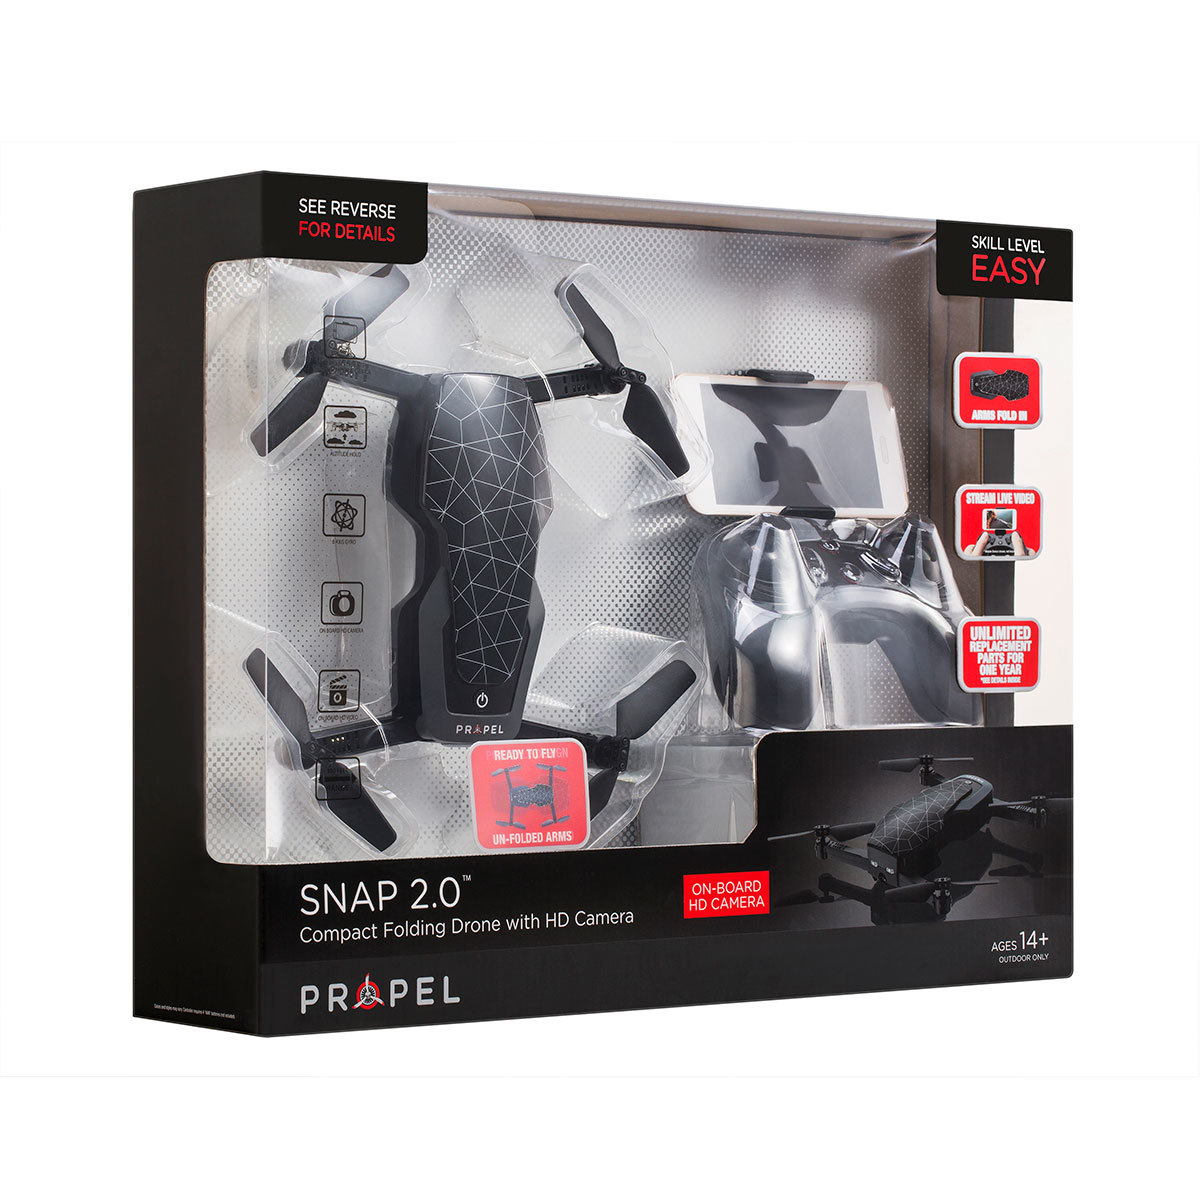 Propel Snap drone boxed image